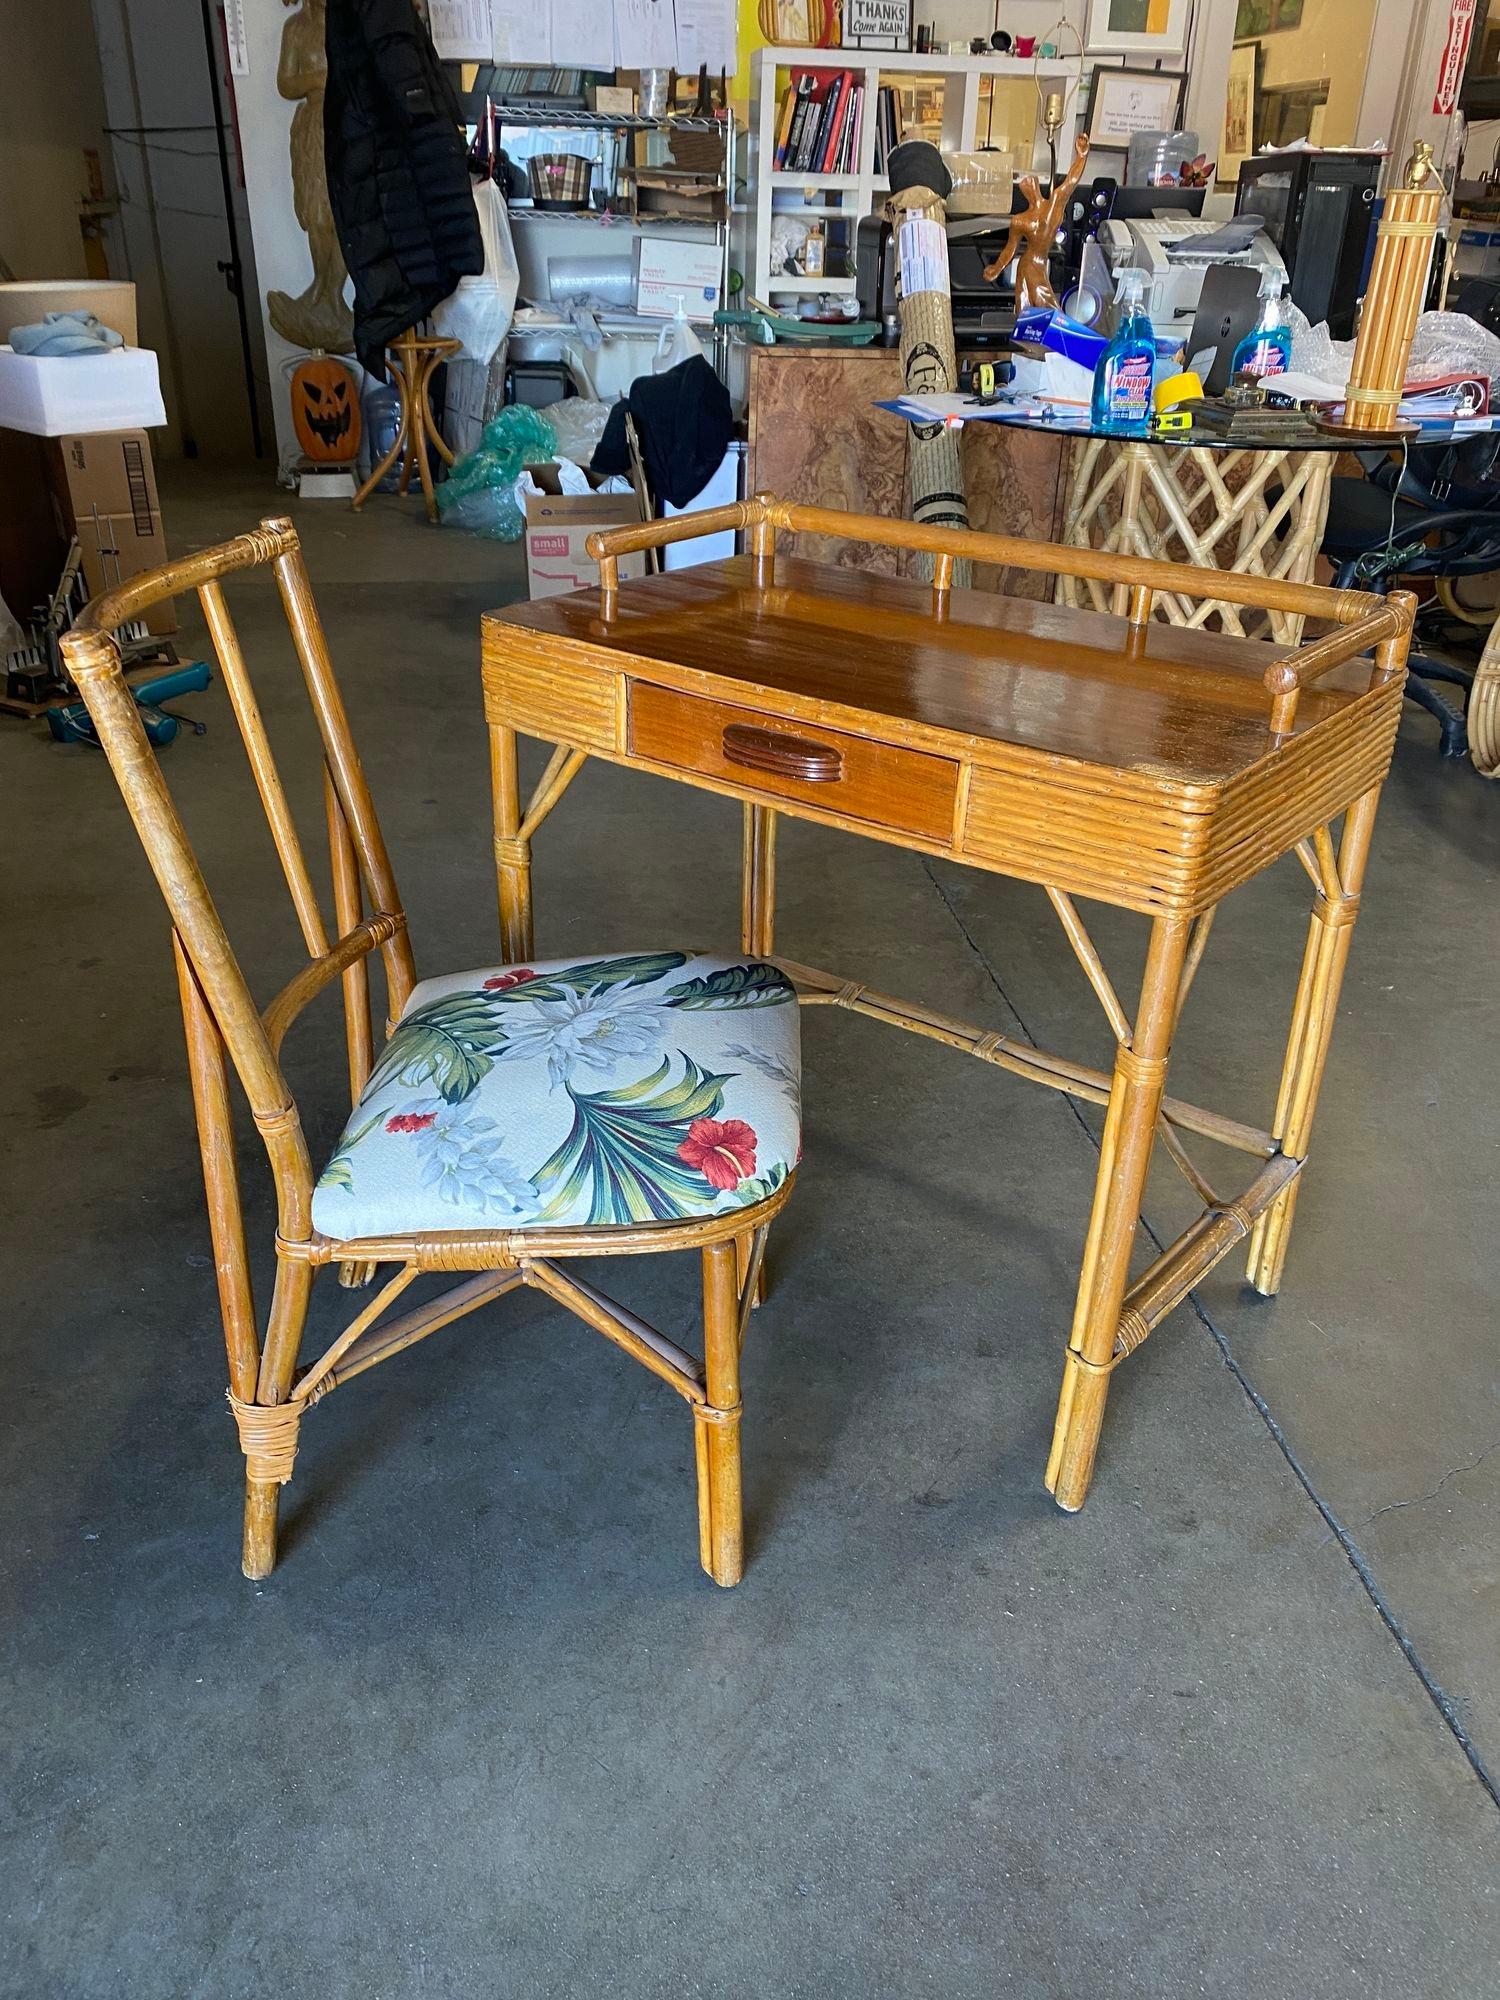 Original Mid Century Mahogany and rattan secretary desk with matching chair. This late 1950s desk features a mahogany top with rattan legs and wicker sides, a center drawer, and built-in top holders.

Desk: H 34 in. x W 16 in. x D 186 in.
Chair: H